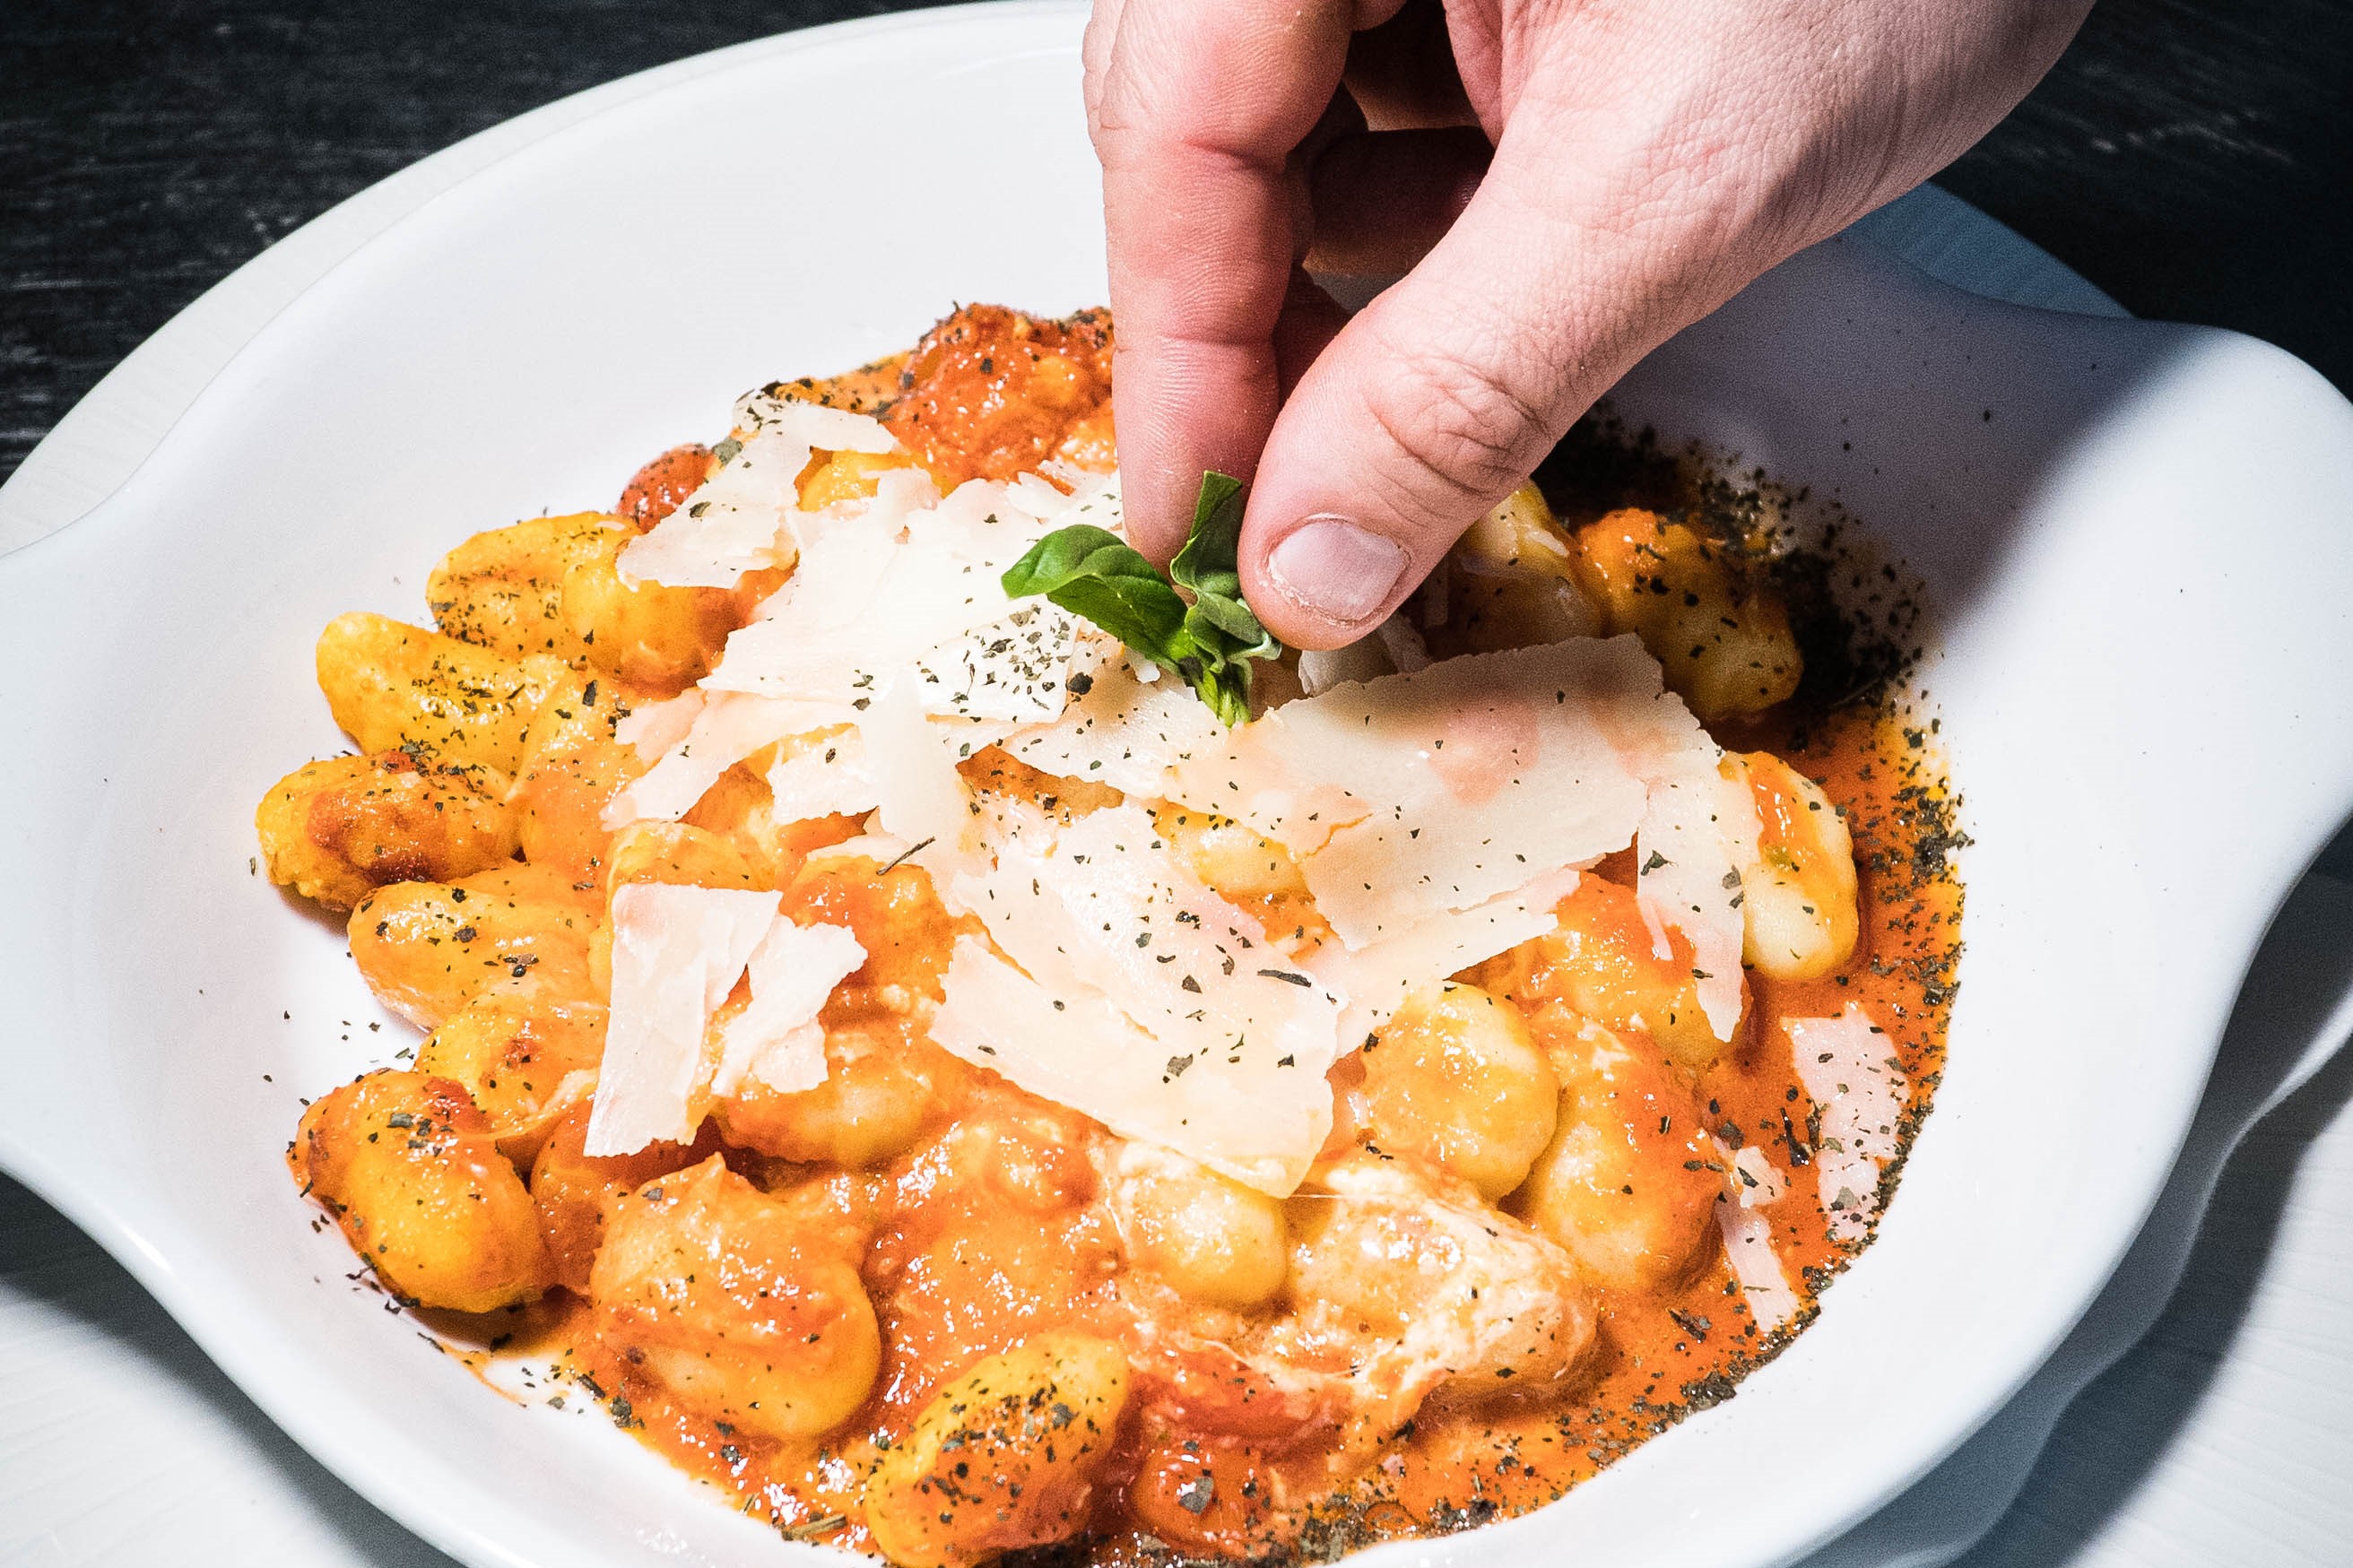 A hand is putting parmesan on a plate of gnocchi